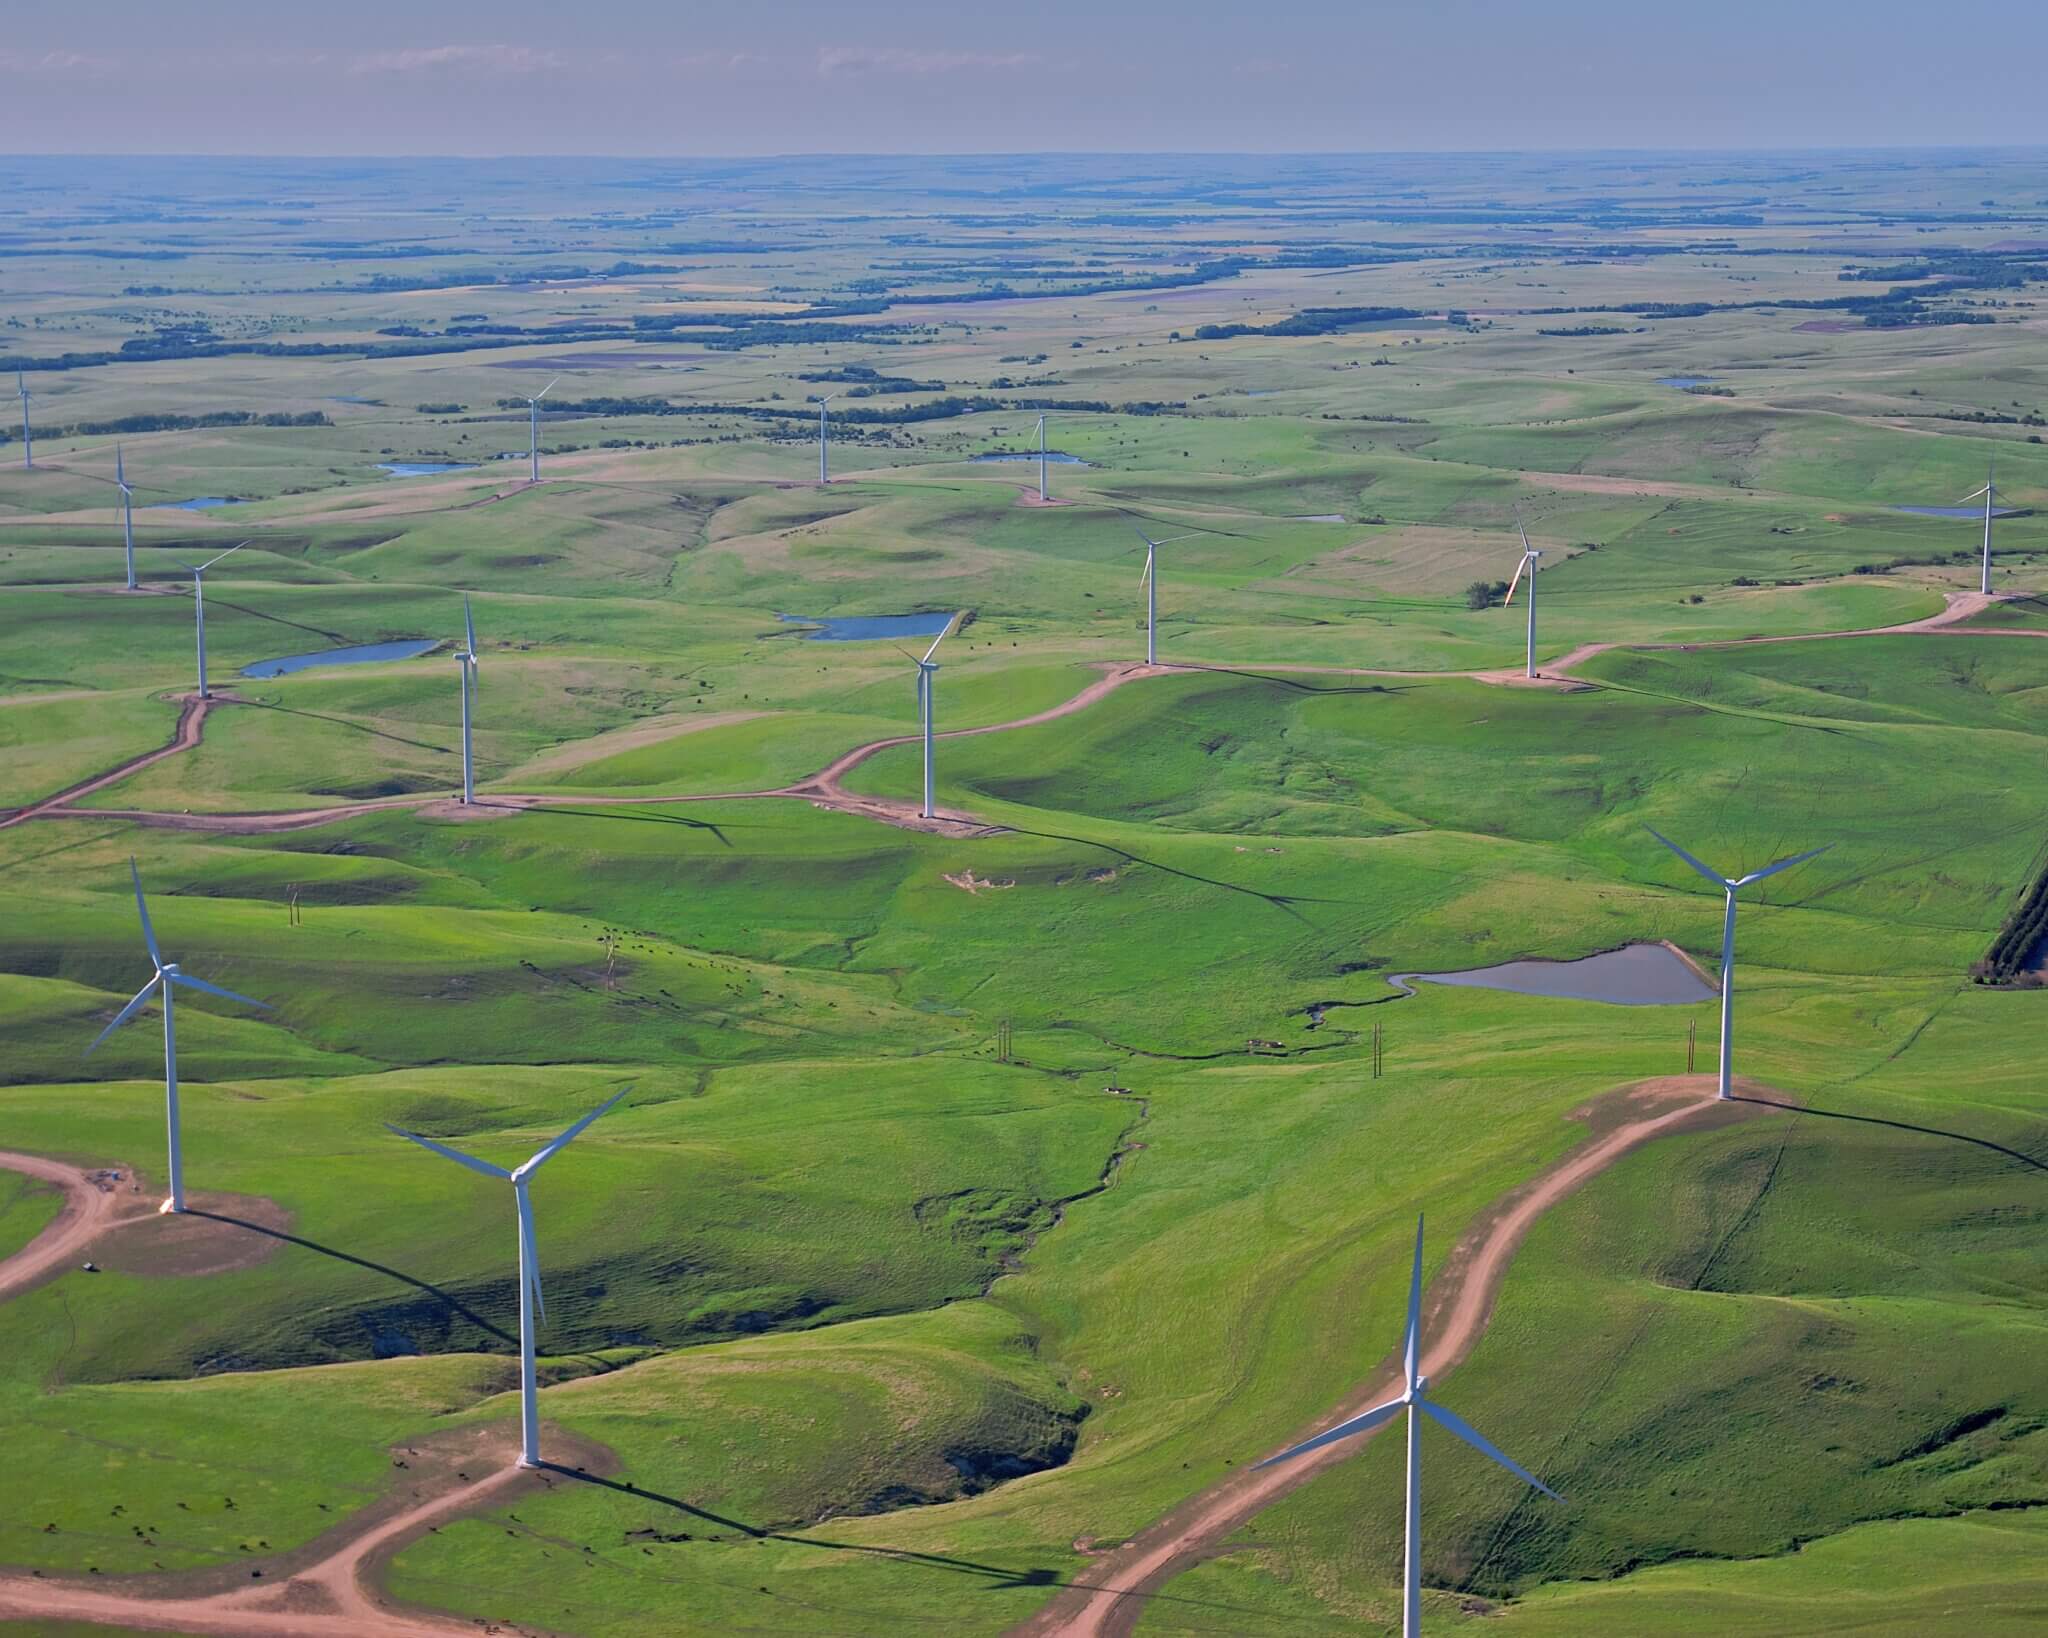 Rolling green hills with wind turbines spaced evenly throughout.